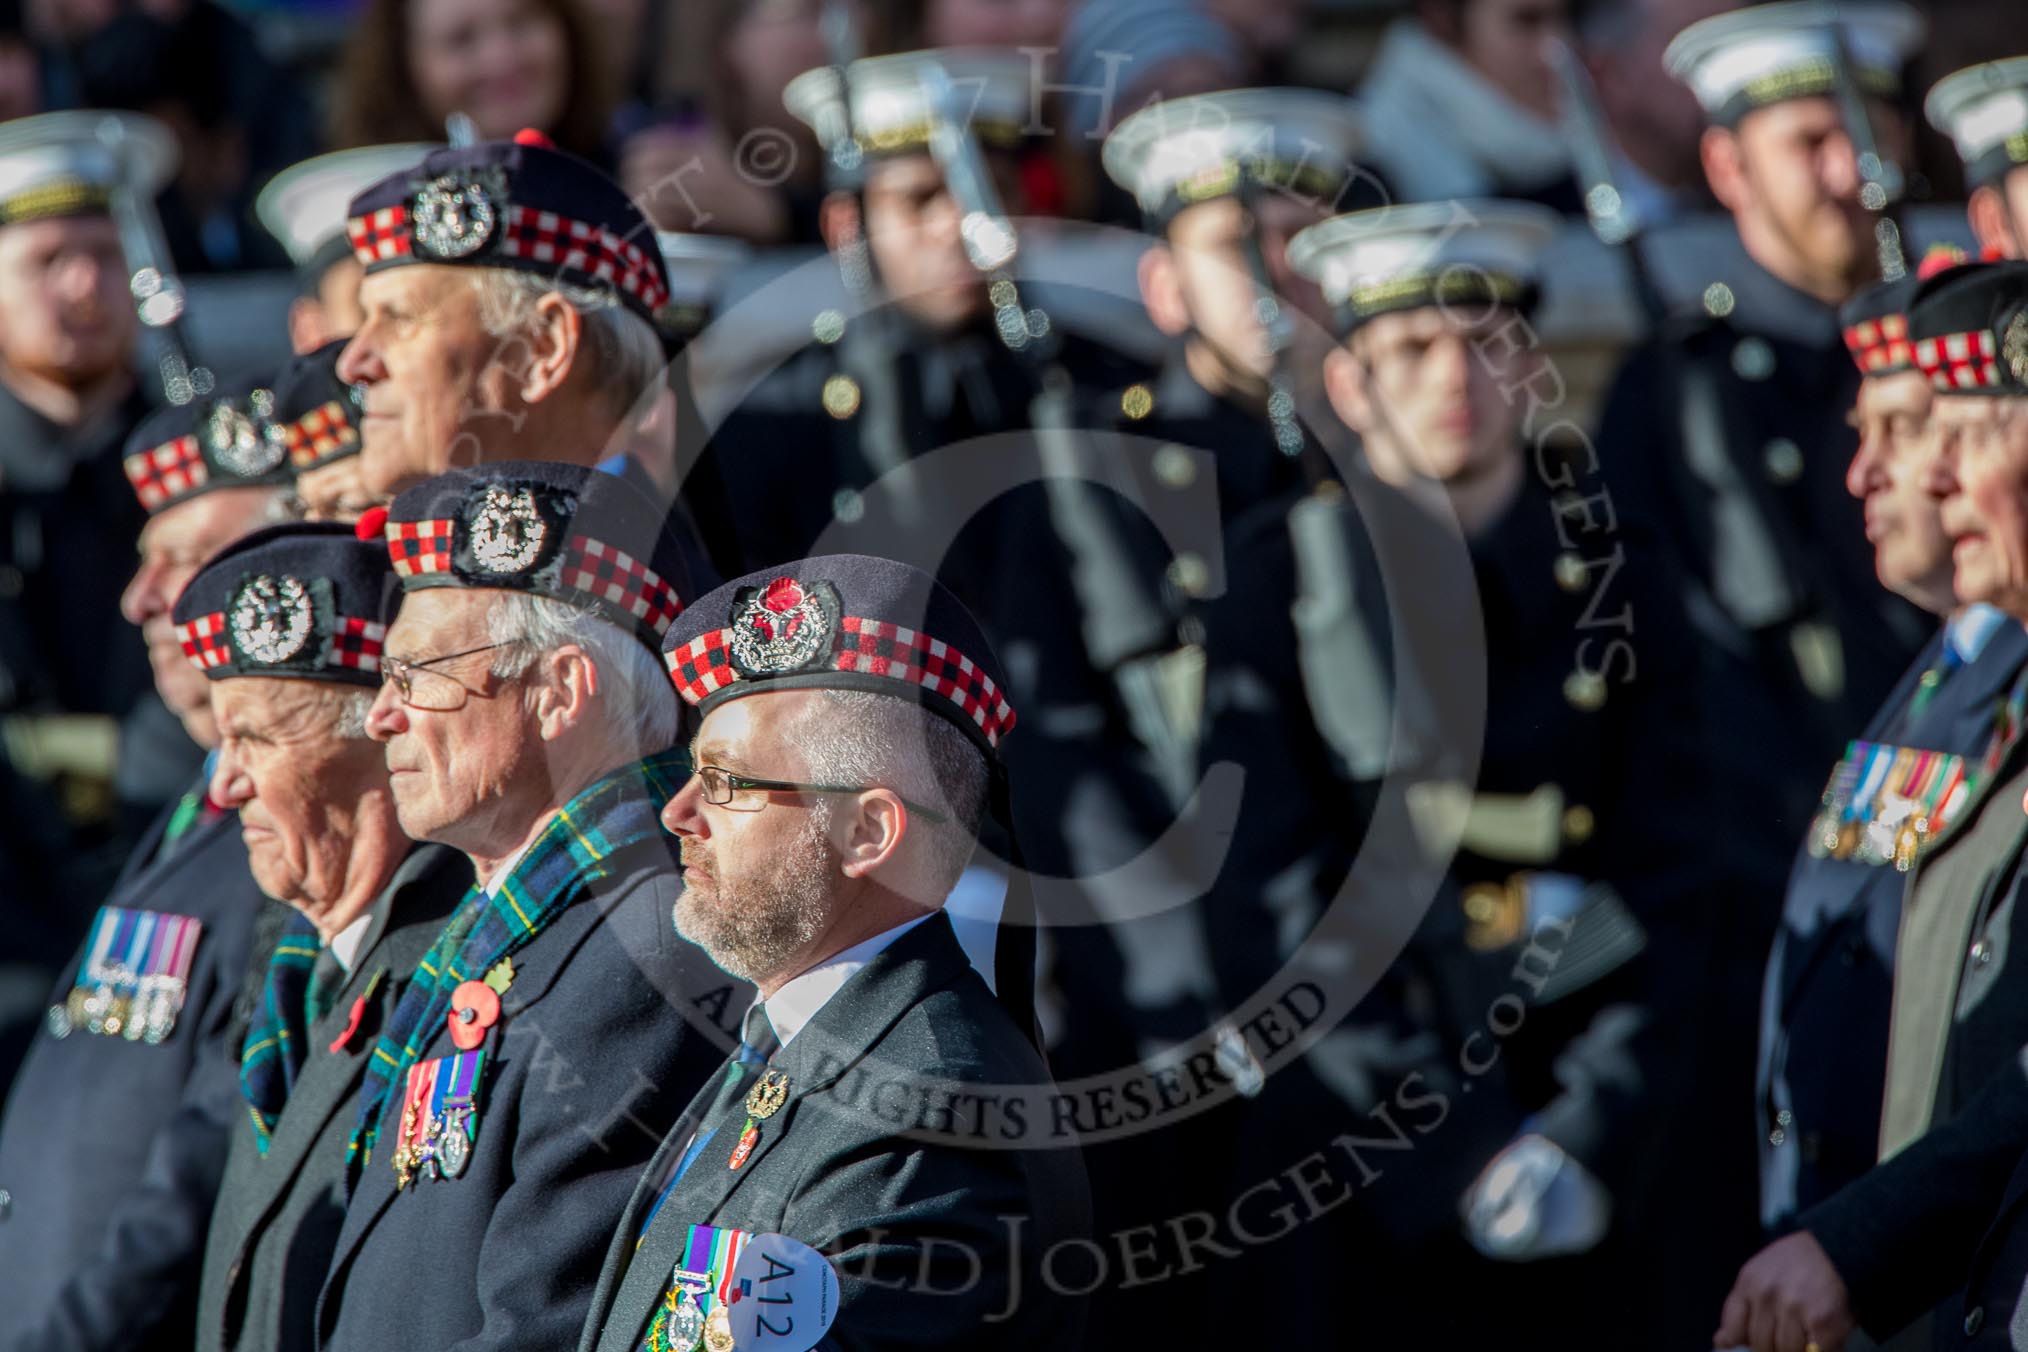 The Gordon Highlanders London Association (Group A12, 37 members) during the Royal British Legion March Past on Remembrance Sunday at the Cenotaph, Whitehall, Westminster, London, 11 November 2018, 11:58.